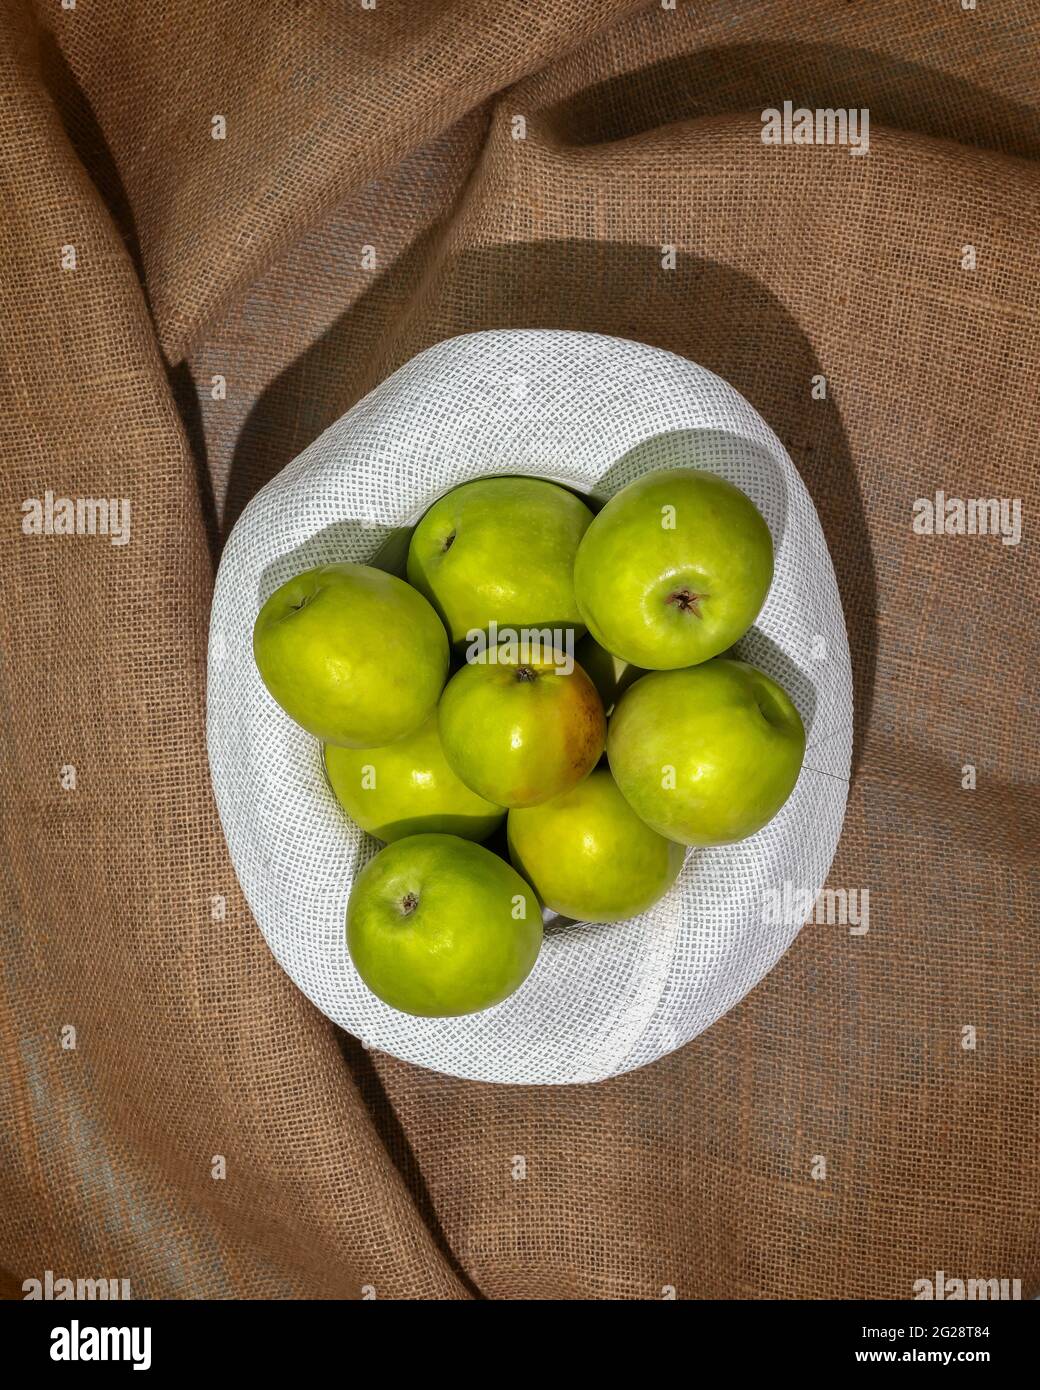 Concept of a local market, farm fruits and Harvest Day celebration, apple picking. Ripe, green apples in a summer white hat on a textile background Stock Photo